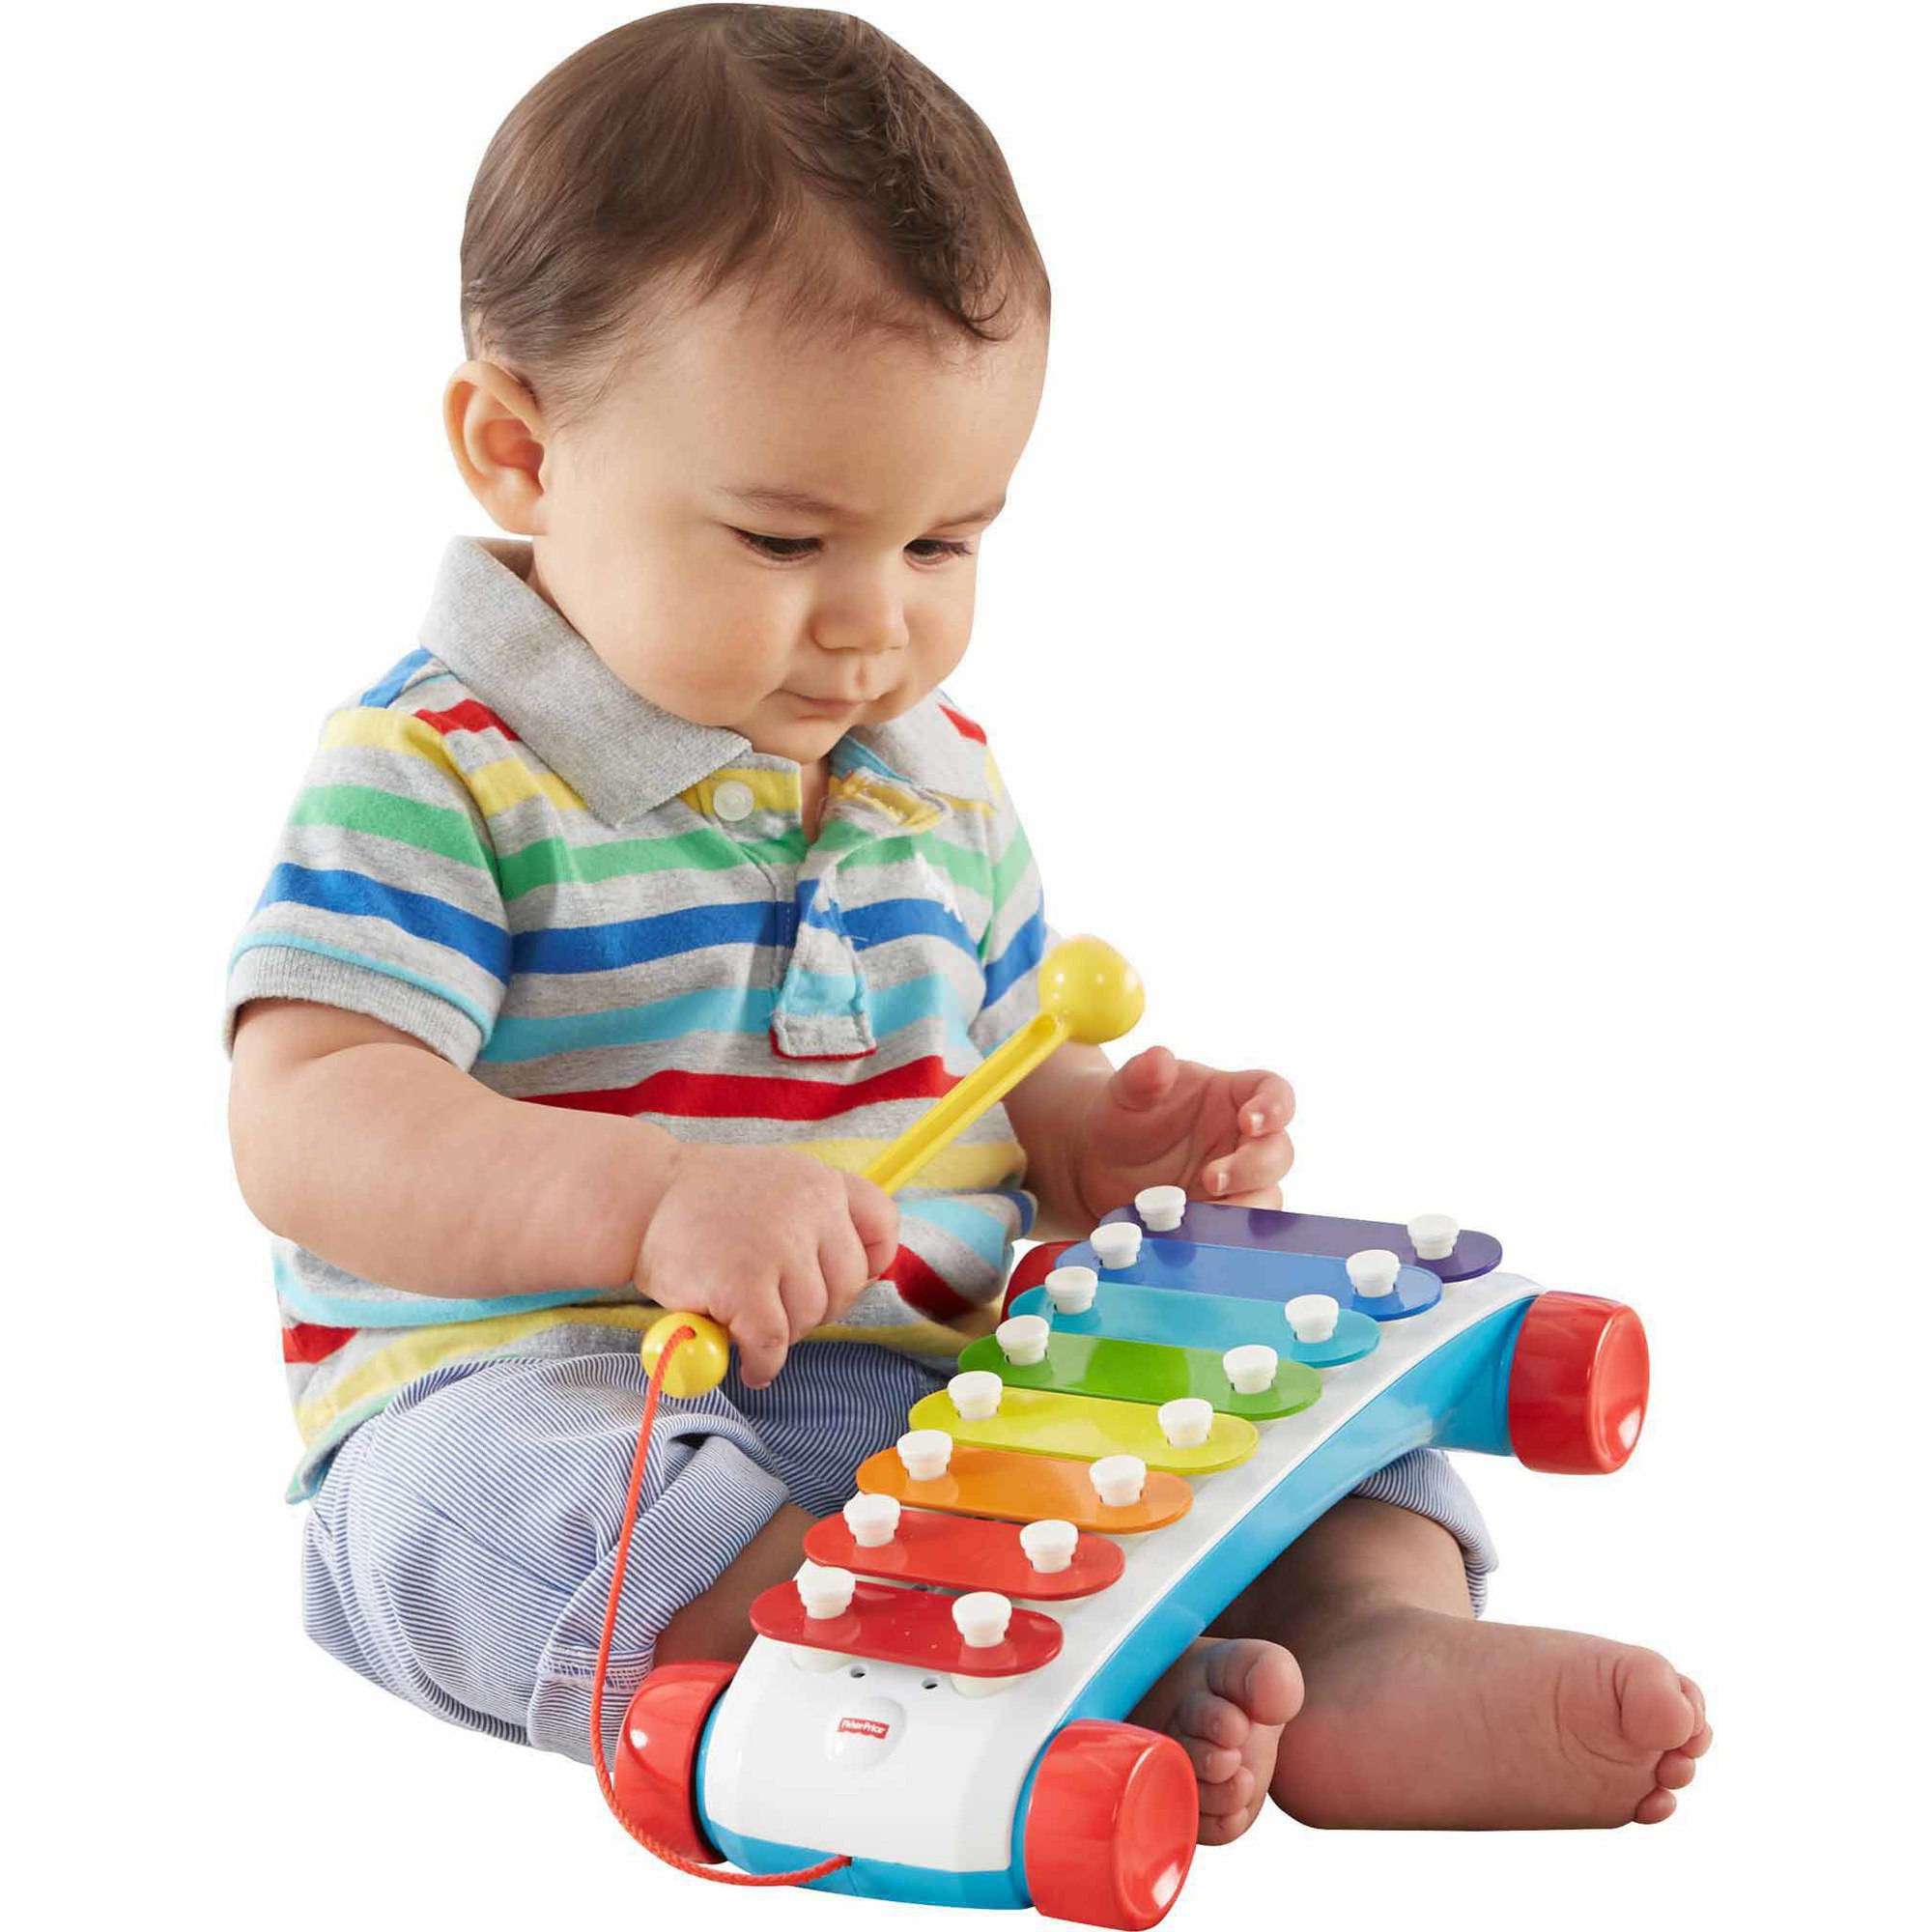 Fisher-Price Classic Xylophone $6 + Free Shipping w/ Walmart+ or $35+